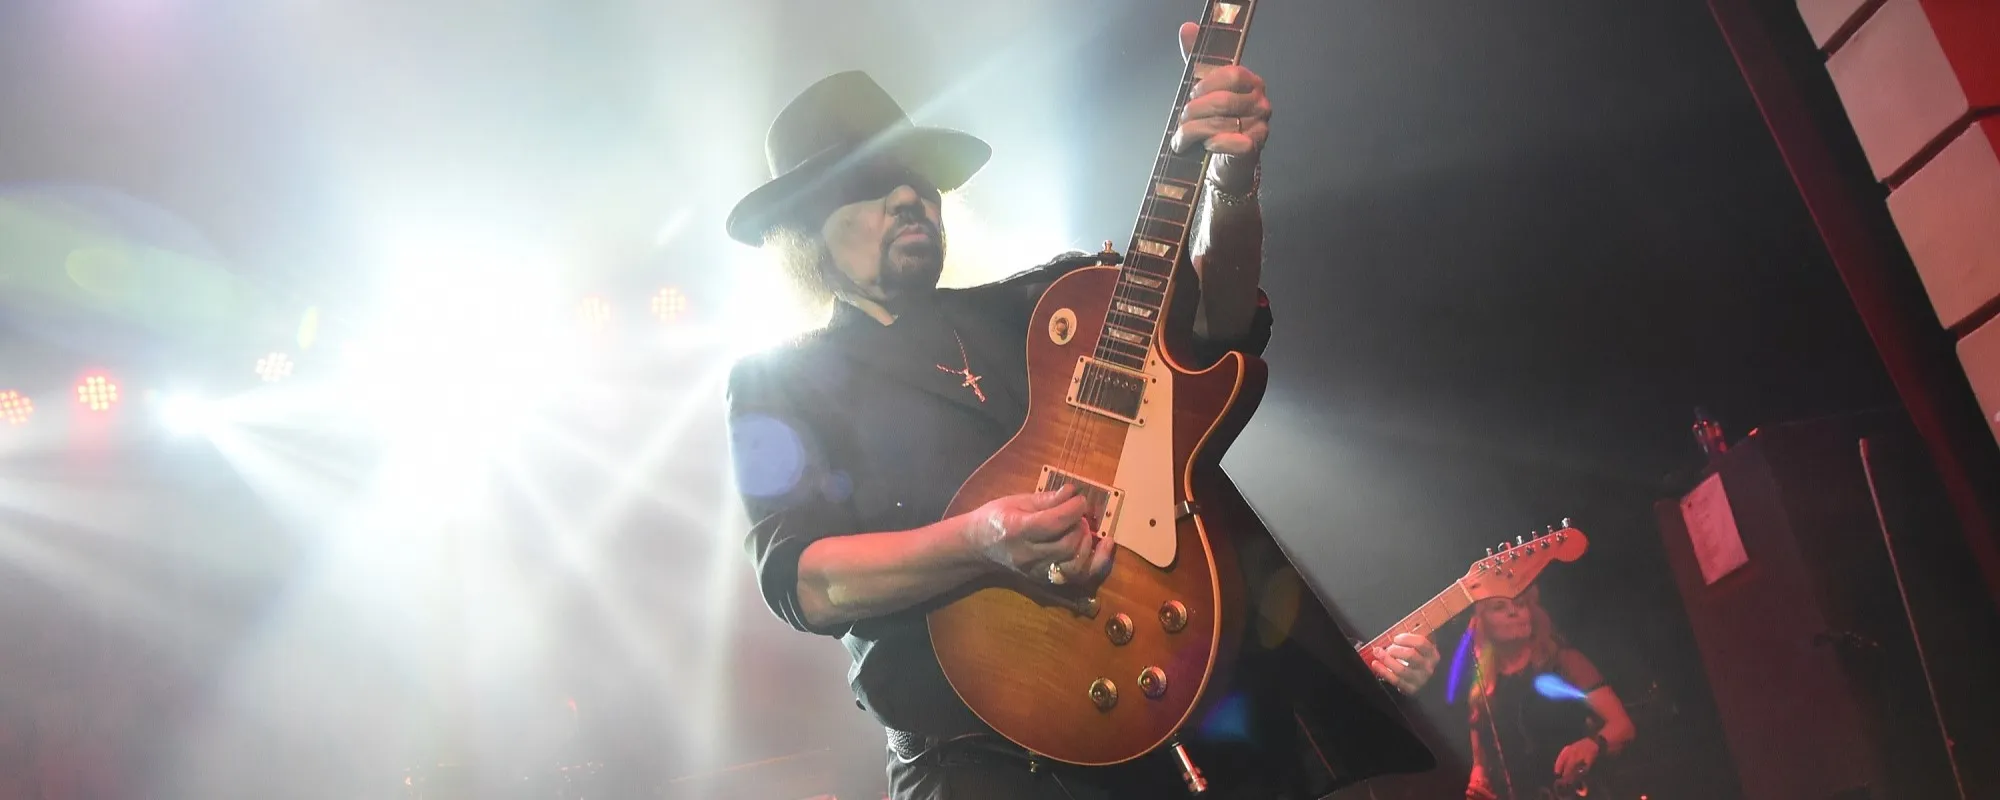 5 Fascinating Facts About Lynyrd Skynyrd Guitarist Gary Rossington a Year After His Passing